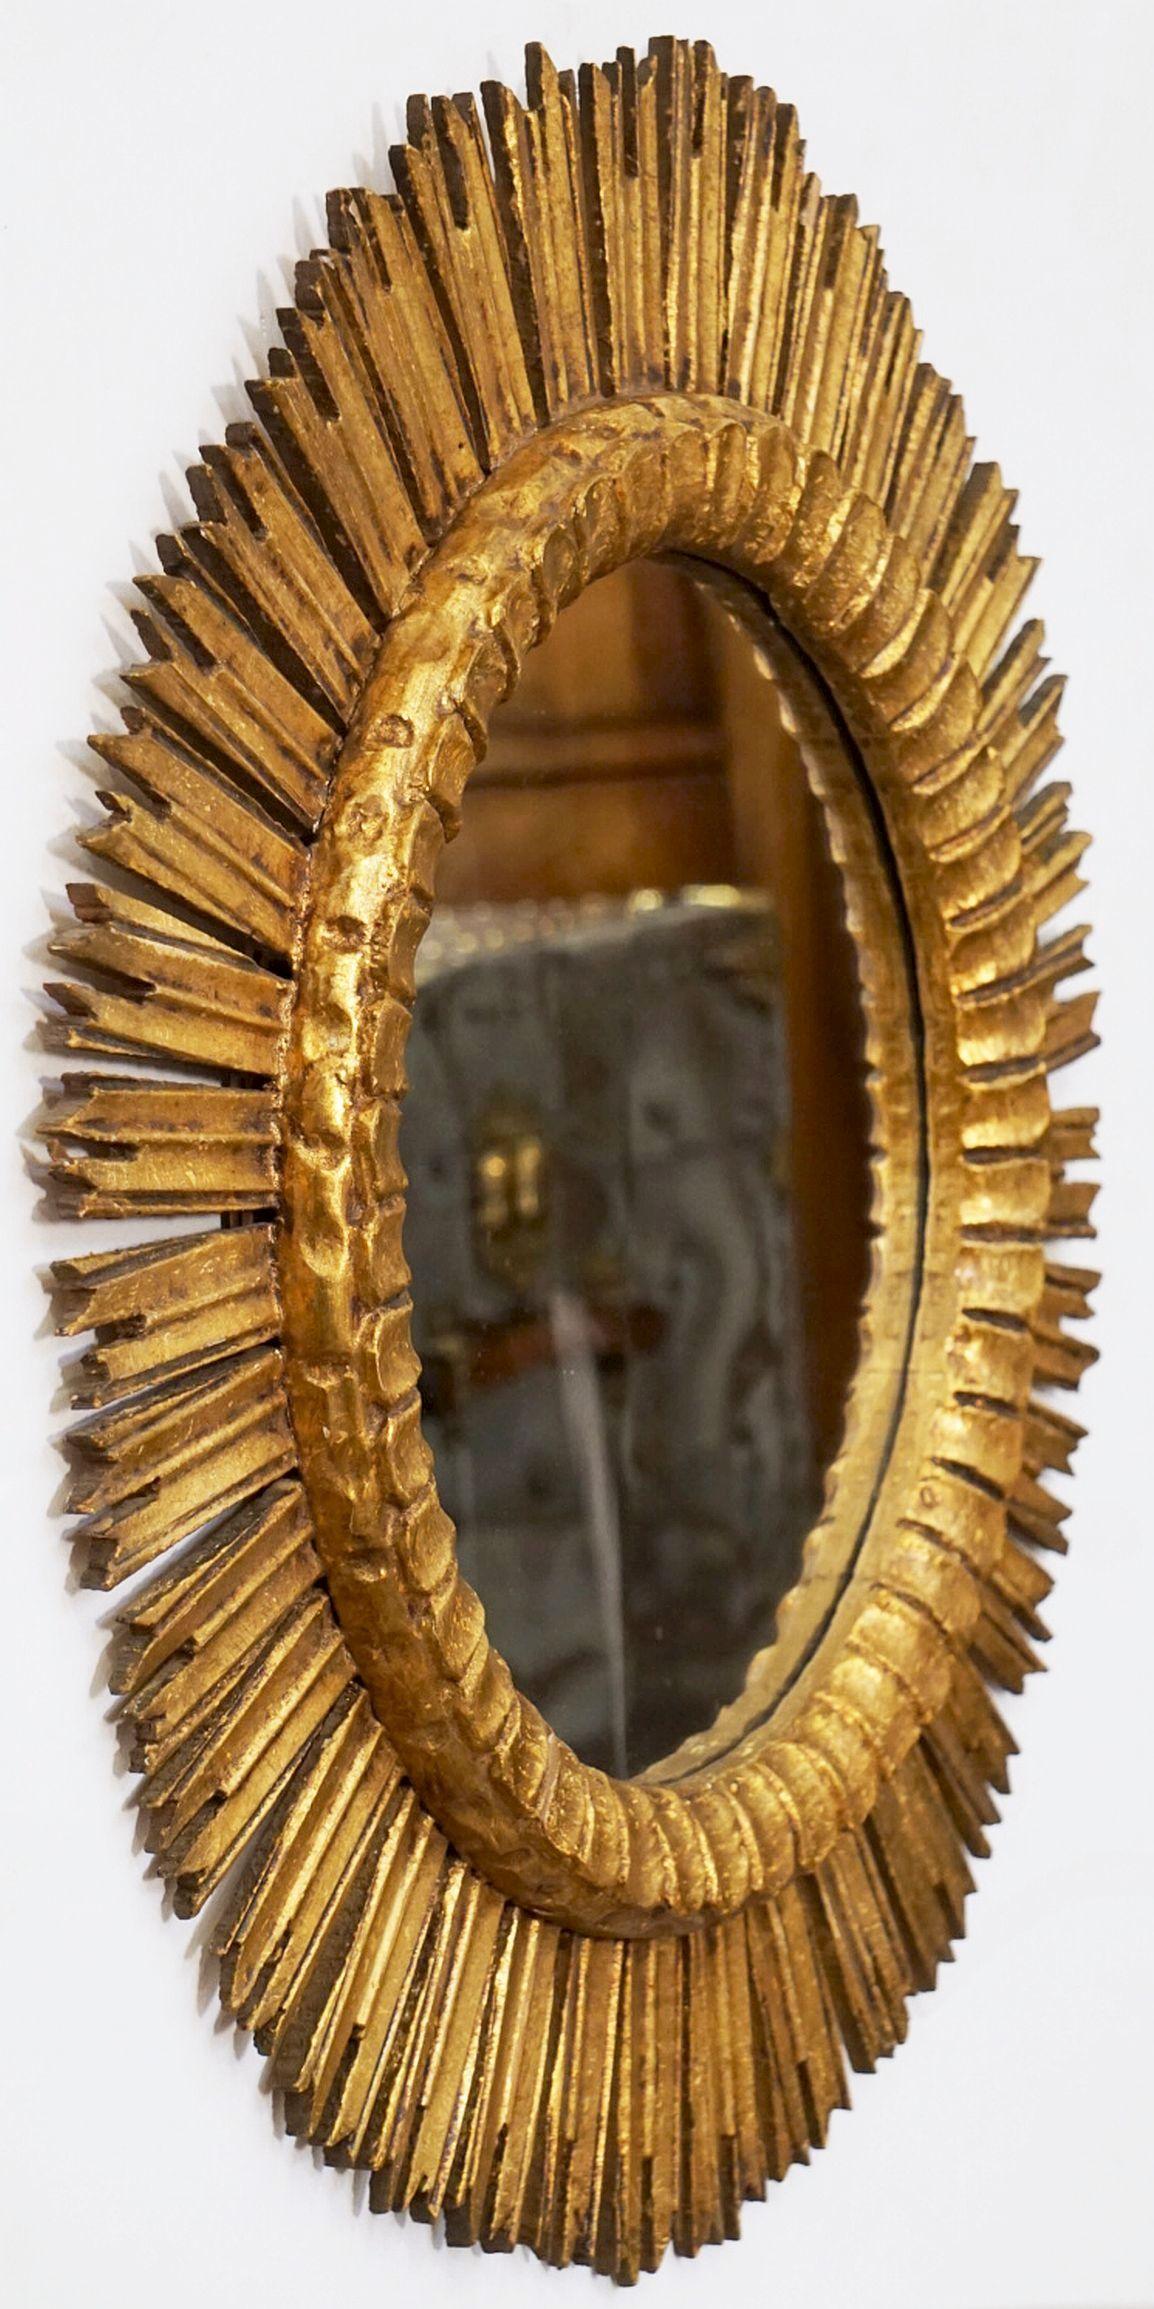 A lovely large French gilt sunburst (or starburst) mirror with round mirrored glass center in a moulded giltwood frame.

Diameter of 26 inches